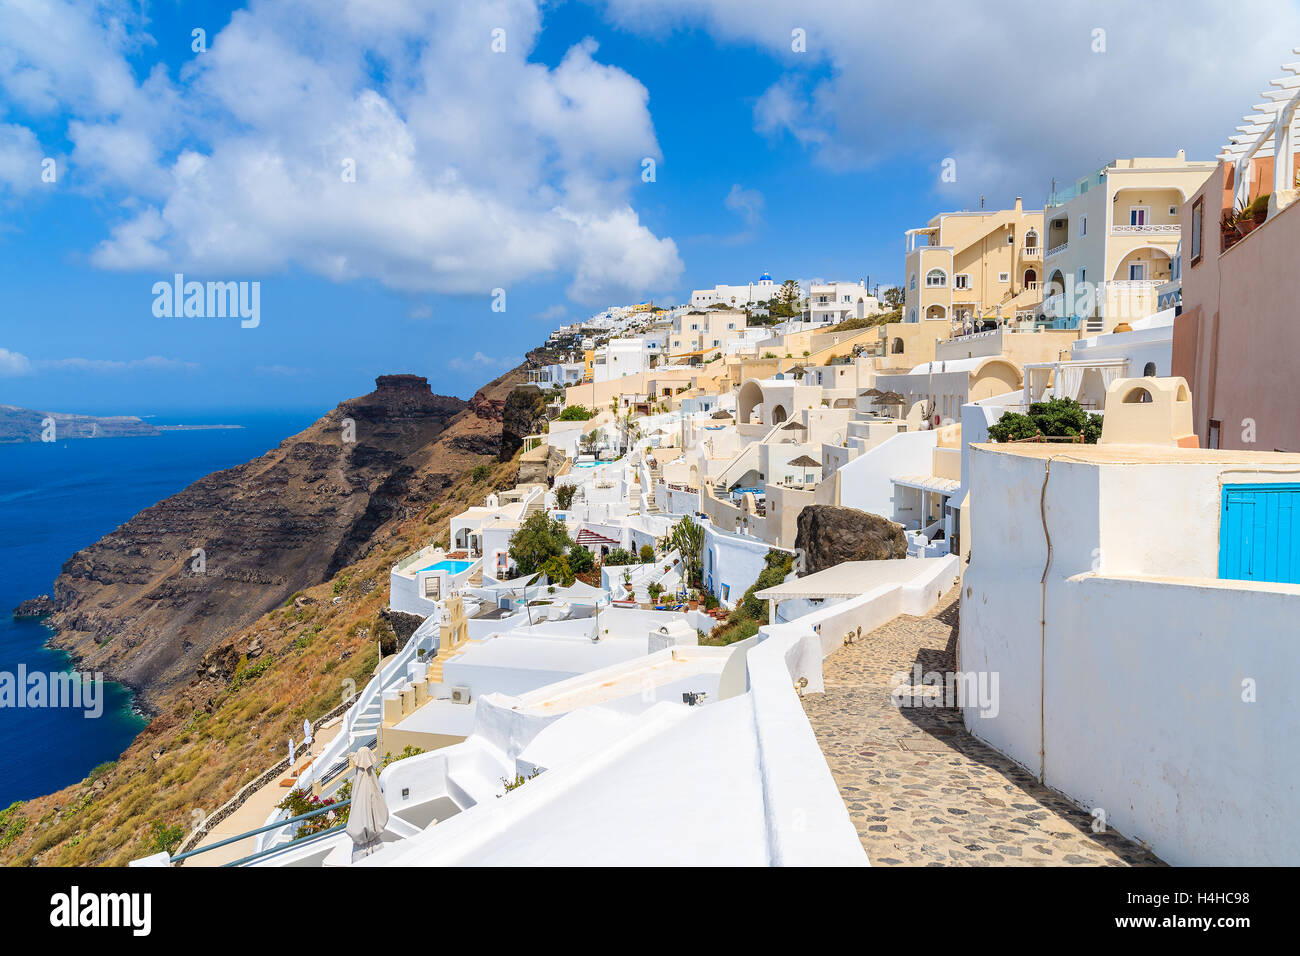 Footpath in Firostefani village with many boutique hotels built on cliff side, Santorini island, Greece Stock Photo